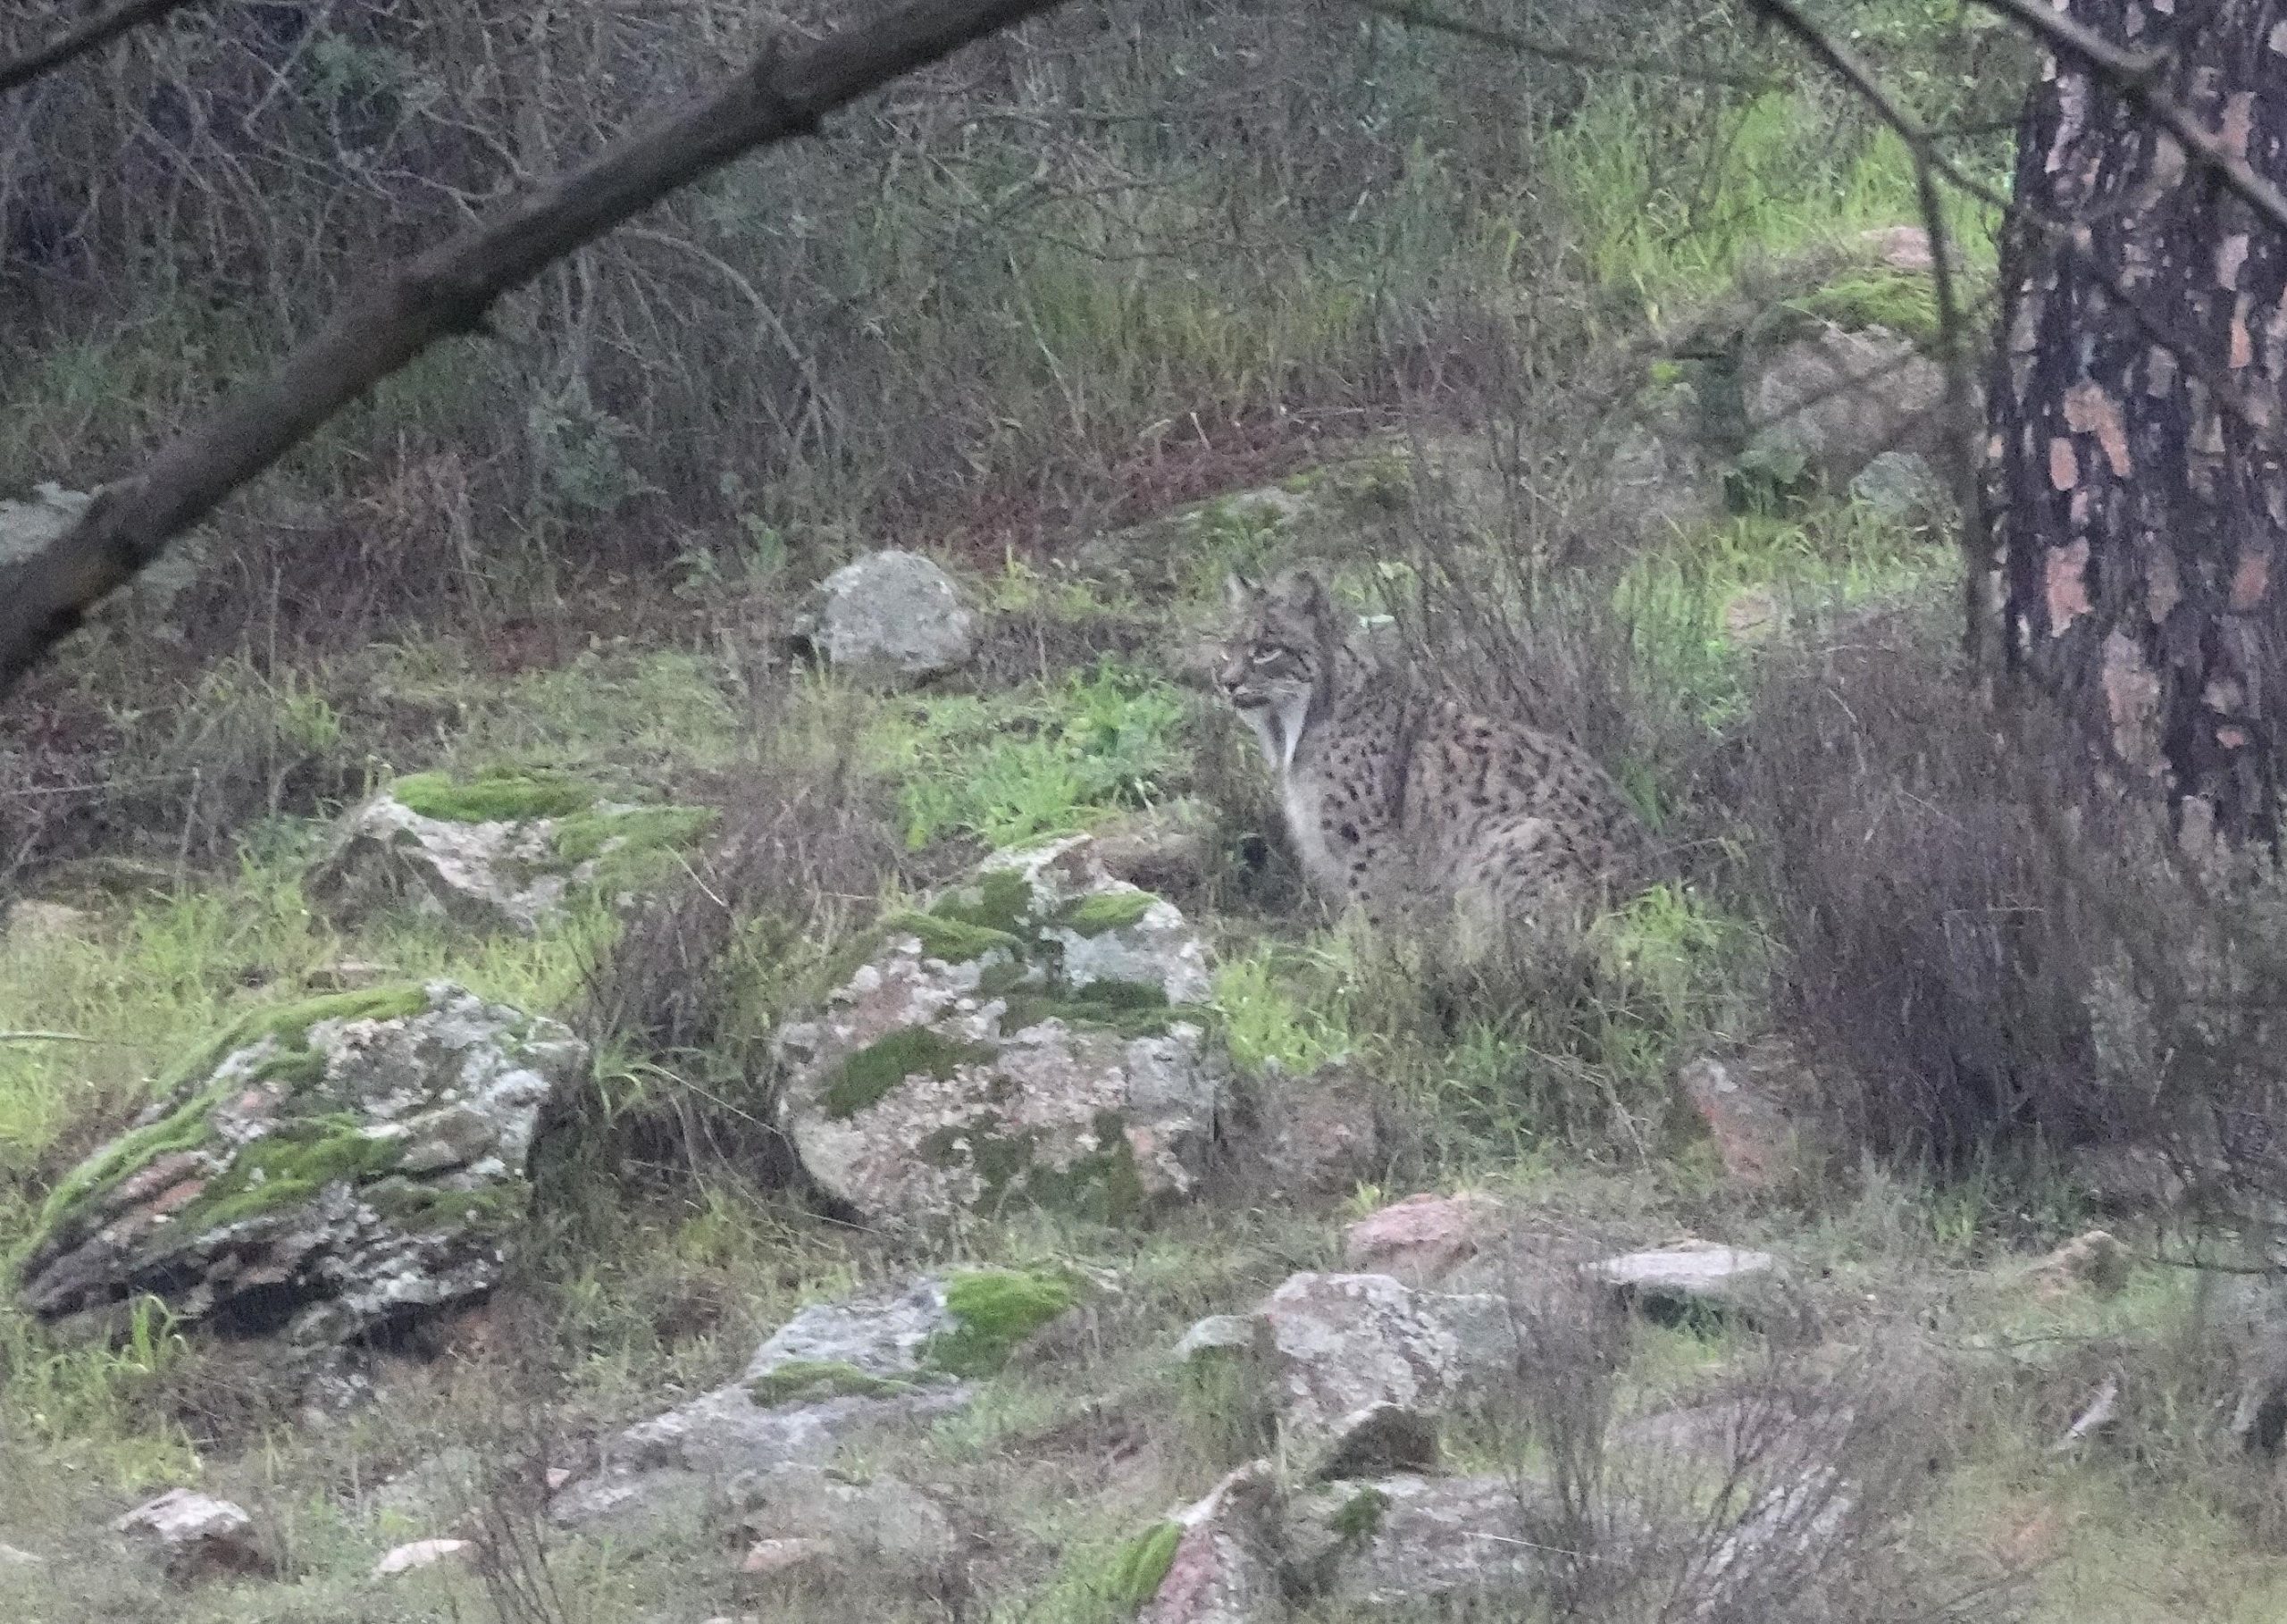 The first Iberian Lynx of the trip